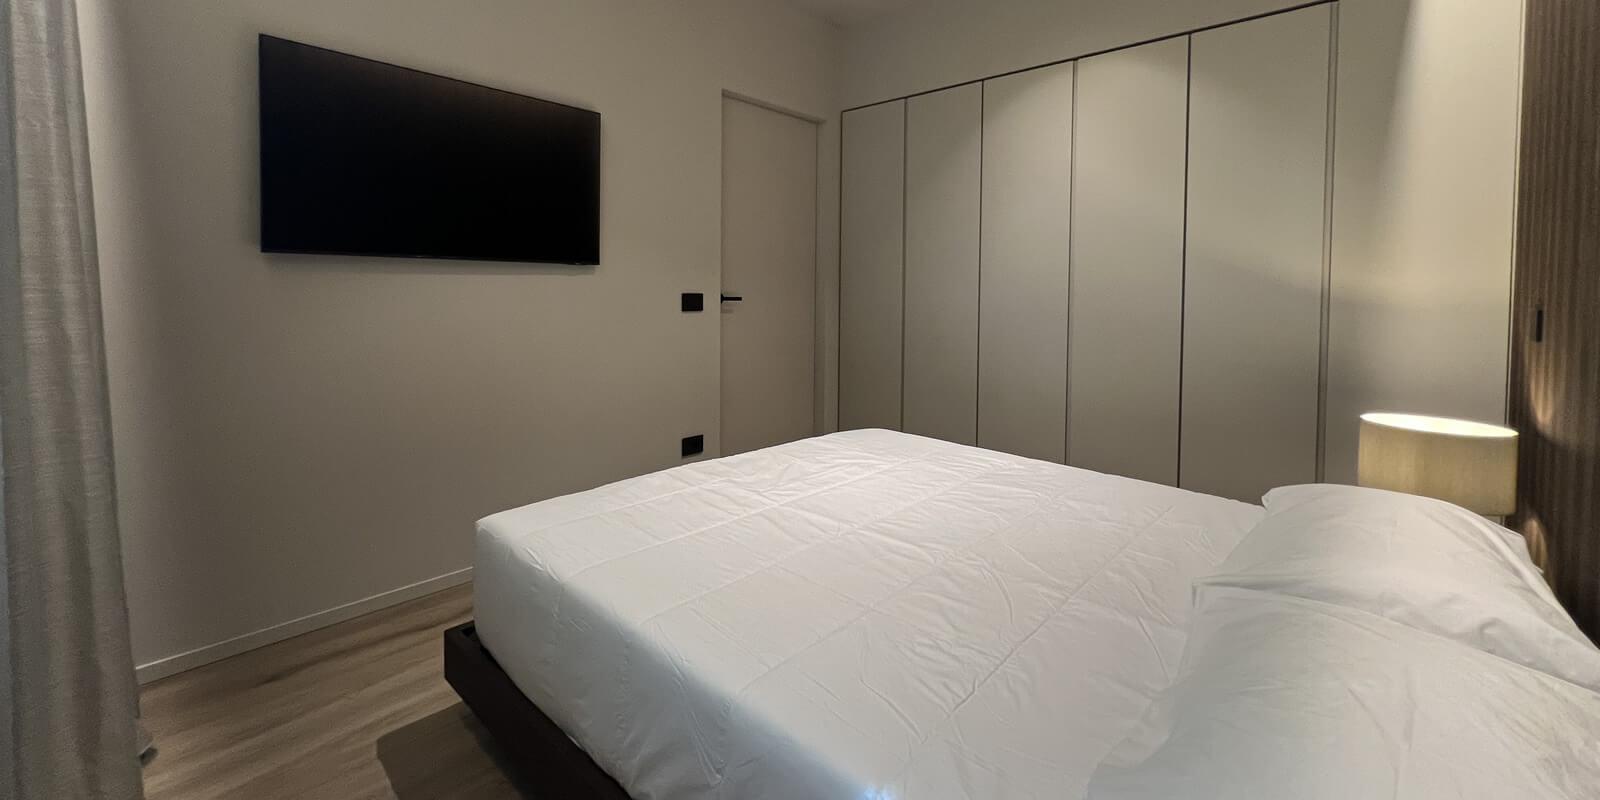 Modern room with a double bed, wall-mounted TV, and built-in wardrobe.